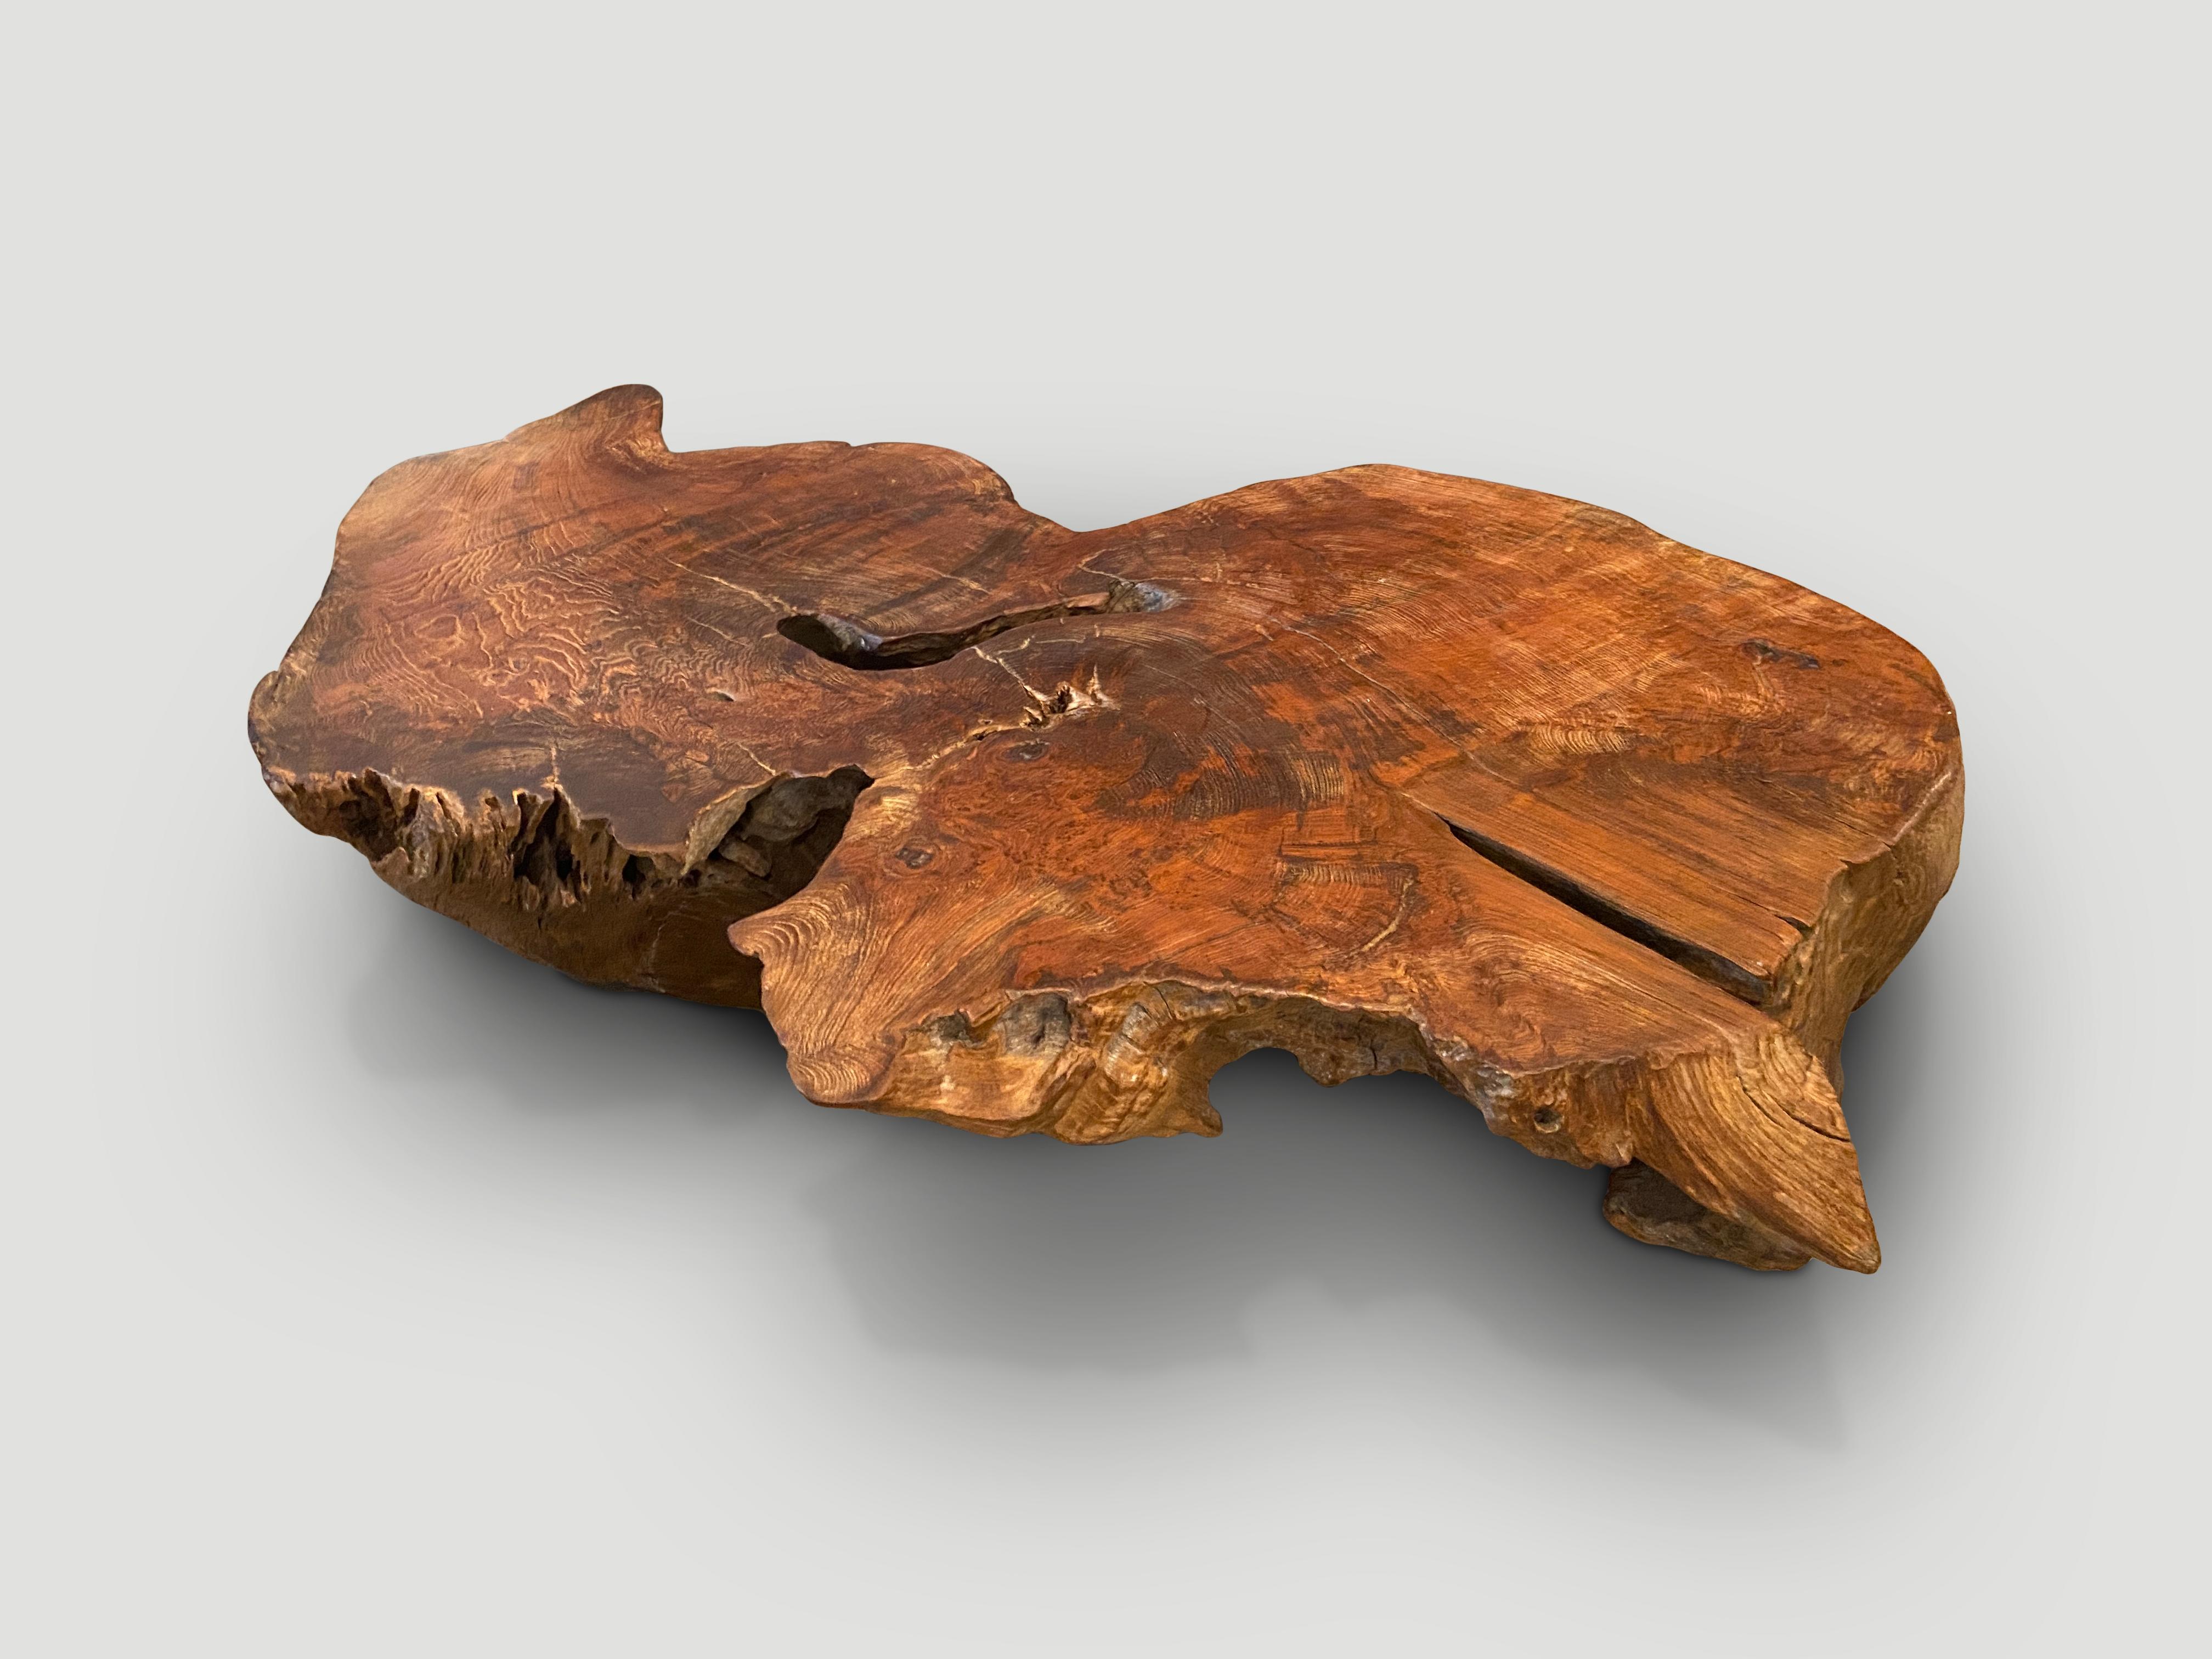 Impressive reclaimed teak root low profile coffee. Hand carved into this usable shape whilst respecting the natural organic wood. Polished with a natural oil revealing the beautiful wood grain. Both sculptural and usable. 

This coffee table was